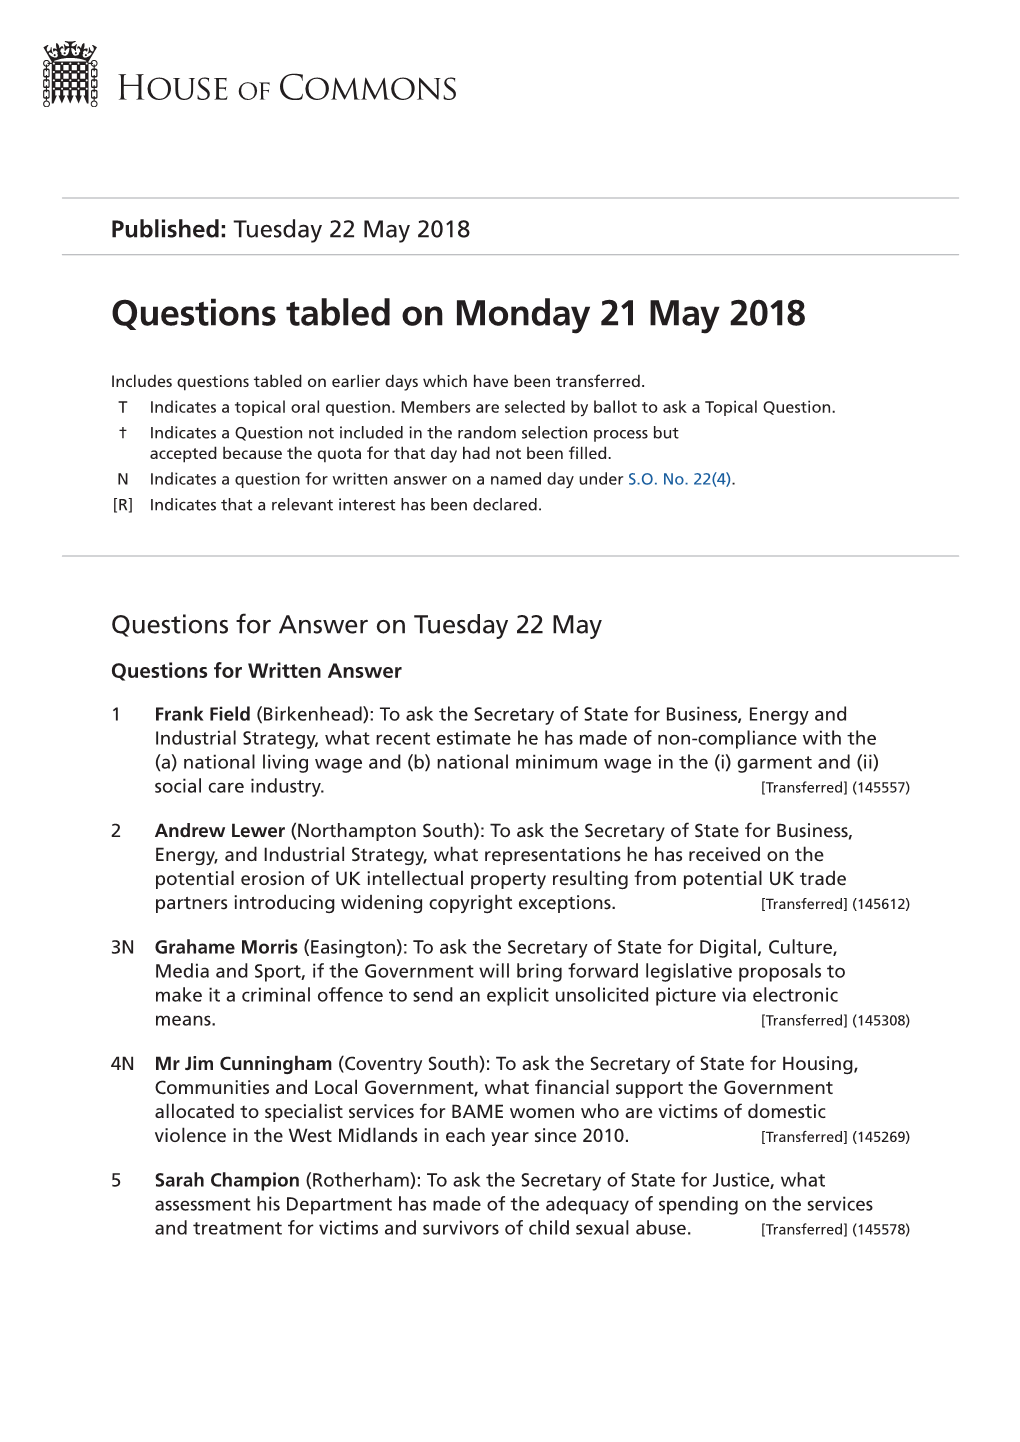 Questions Tabled on Mon 21 May 2018